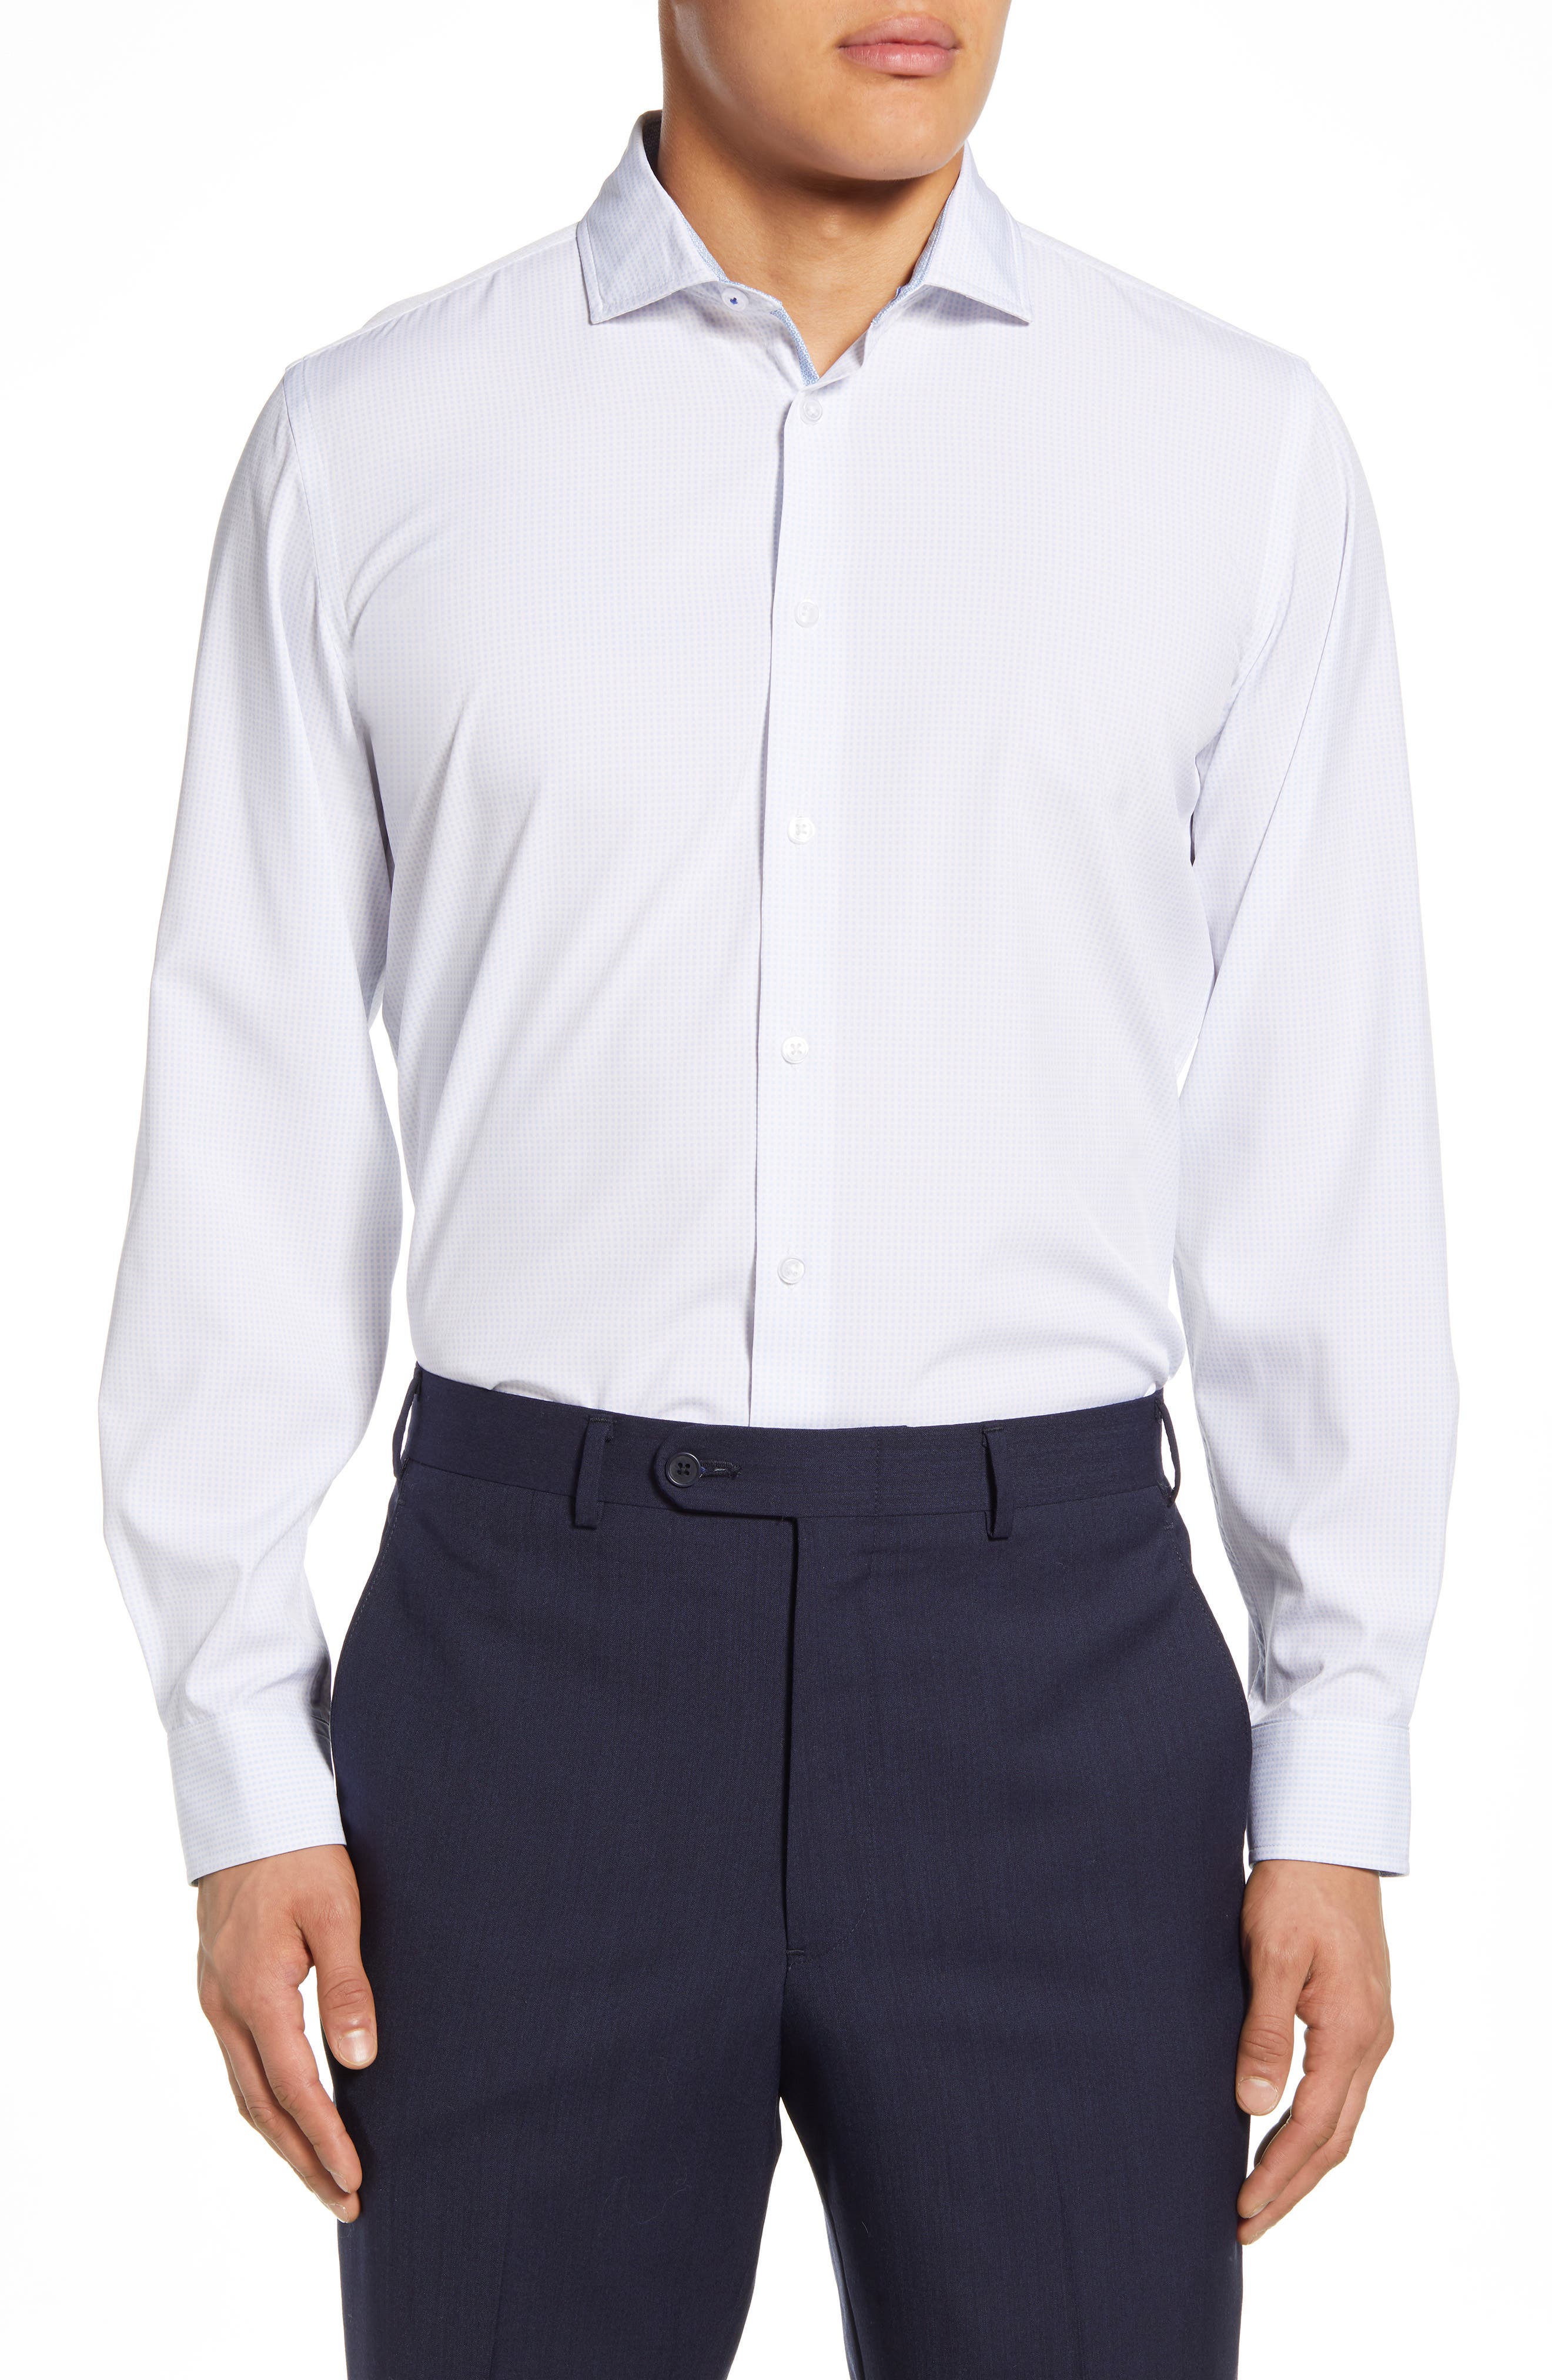 Report Collection | Small Square Print Modern Fit Dress Shirt ...